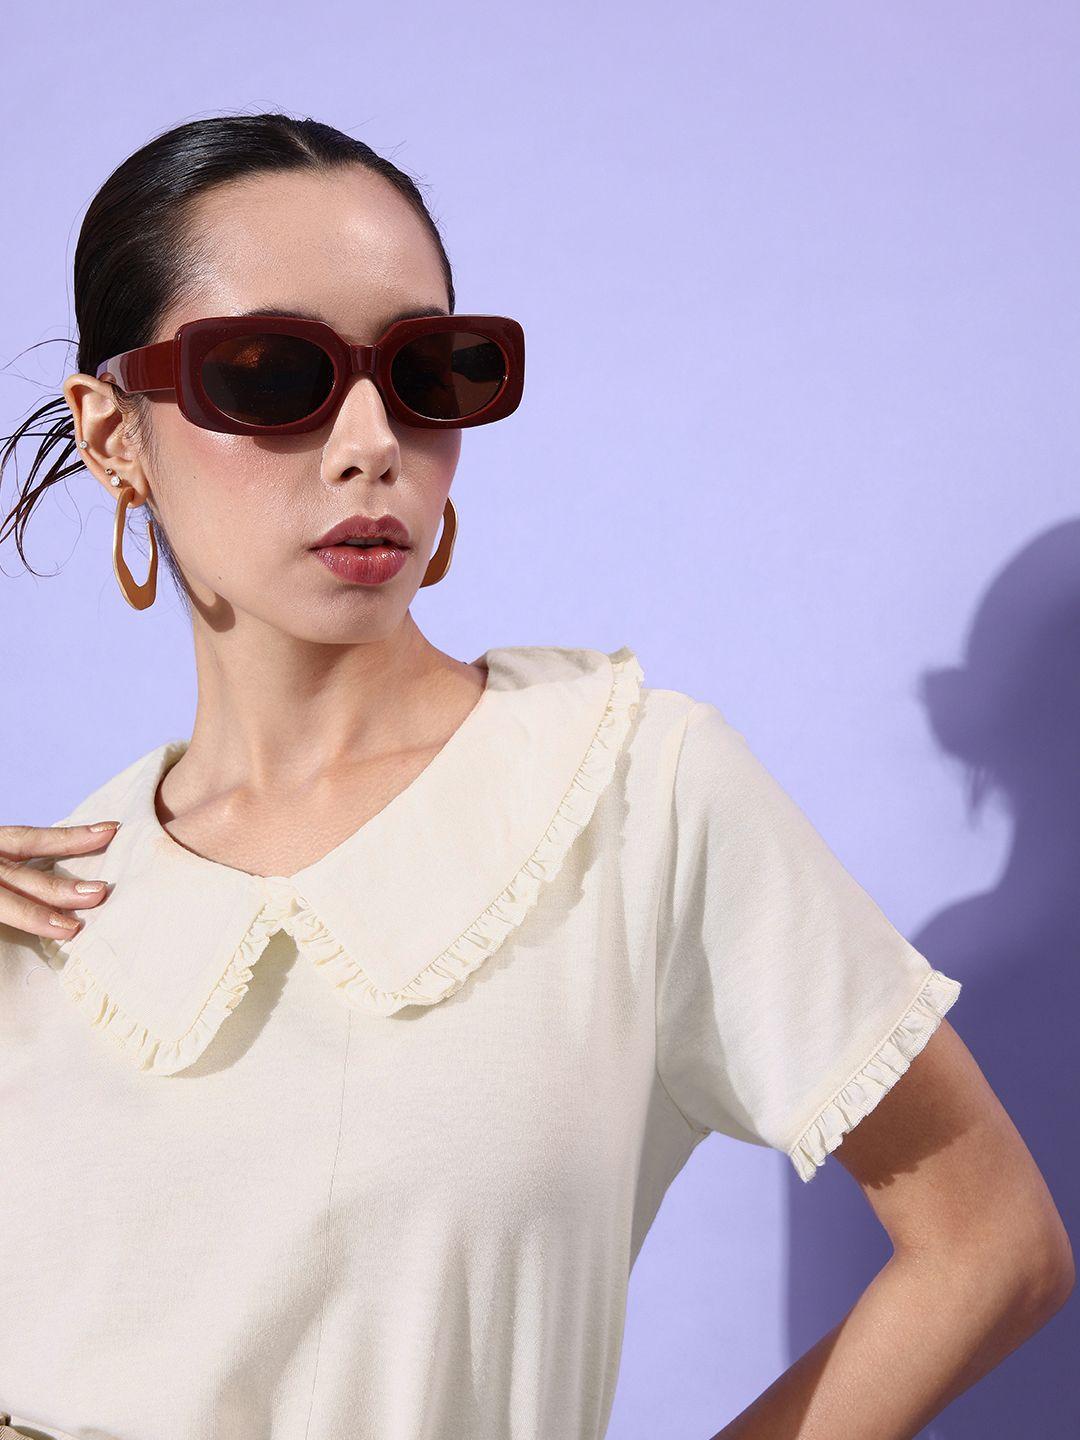 The Roadster Life Co. Pale White Peter Pan Collar Femme Blouse Top